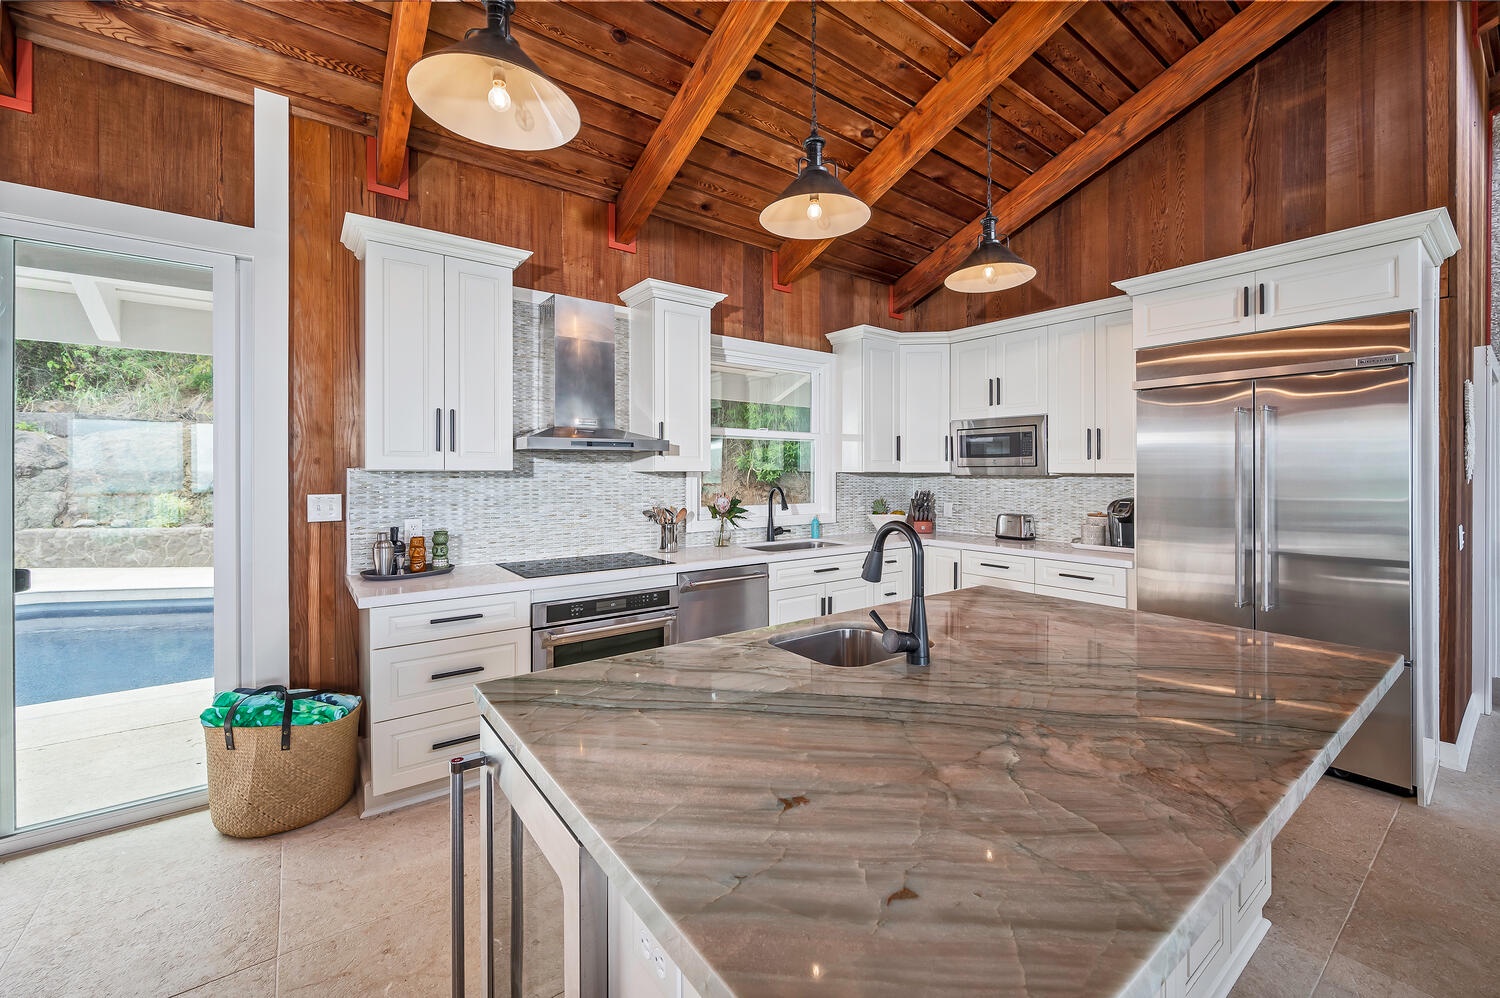 Kailua Vacation Rentals, Hale Lani - This large, spacious kitchen is a chef's dream